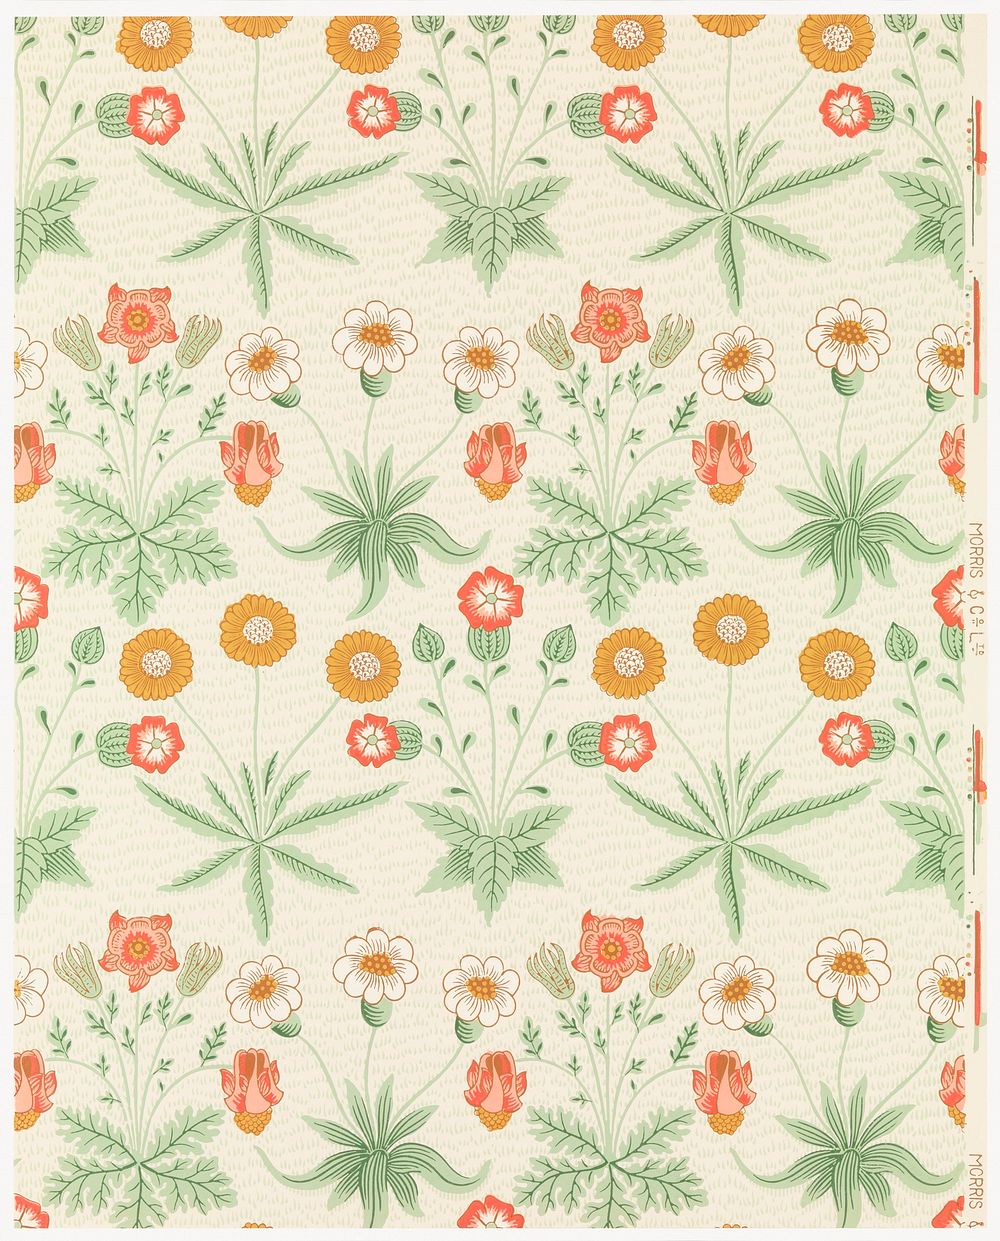 William Morris's (1834-1896) Daisy famous pattern. Original from The MET Museum. Digitally enhanced by rawpixel.